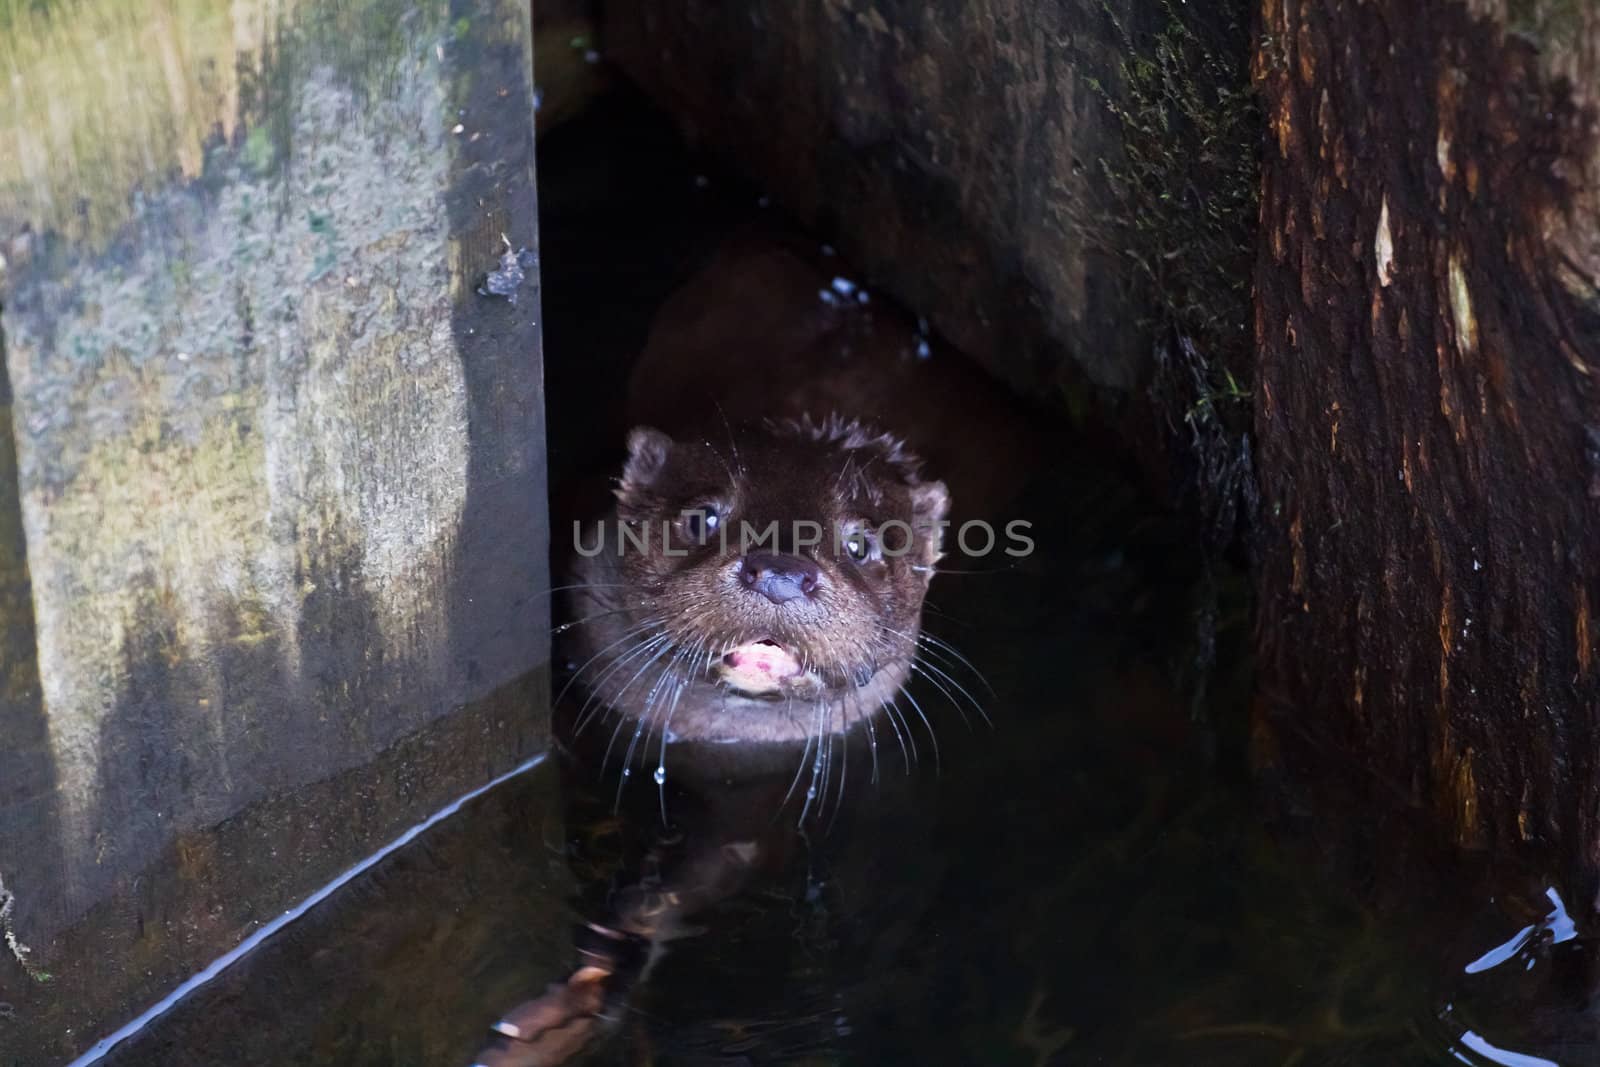 A wild otter peers out from under an abandoned boat wharf. UK.